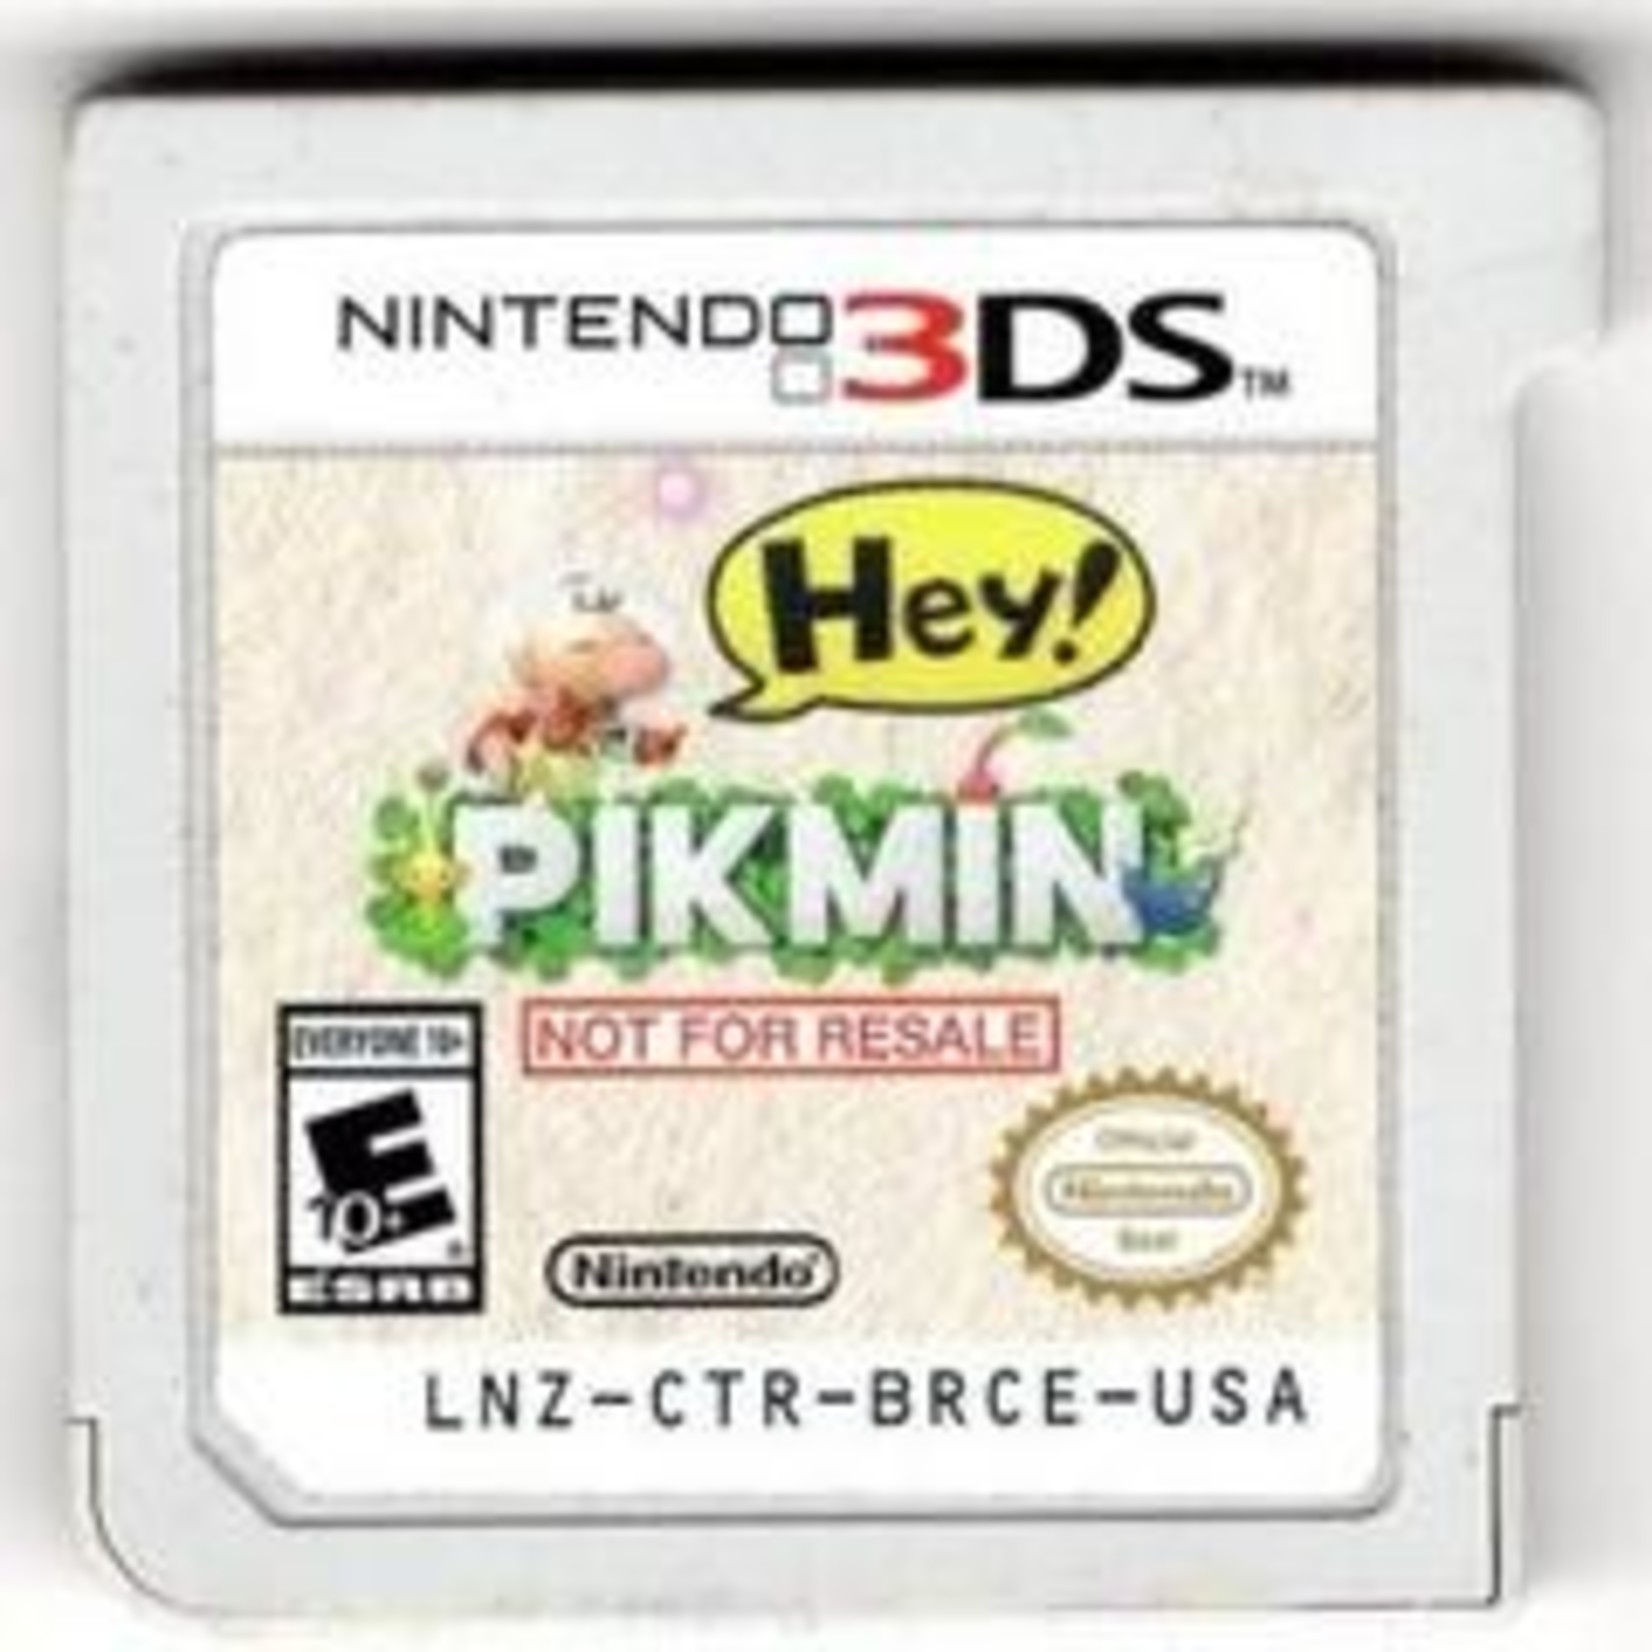 3DS-NOT FOR RESALE HEY PIKMEN